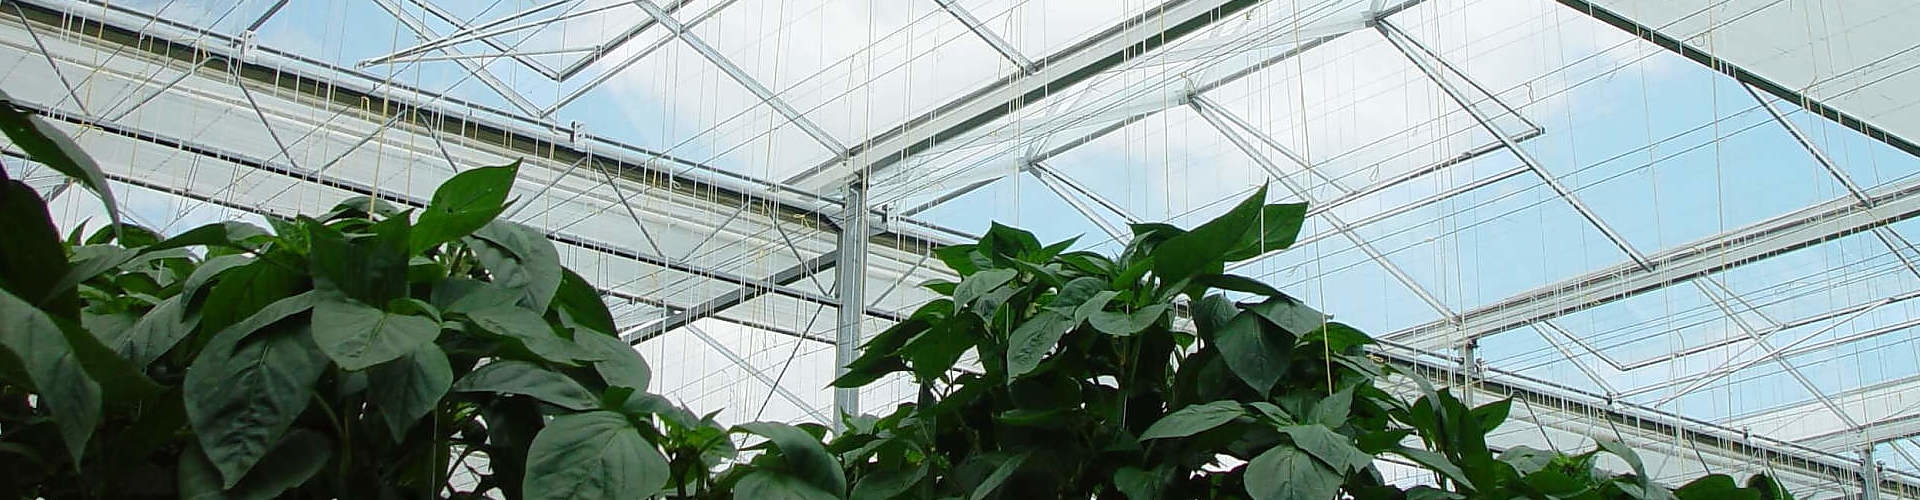 Greenhouses Screening Systems 